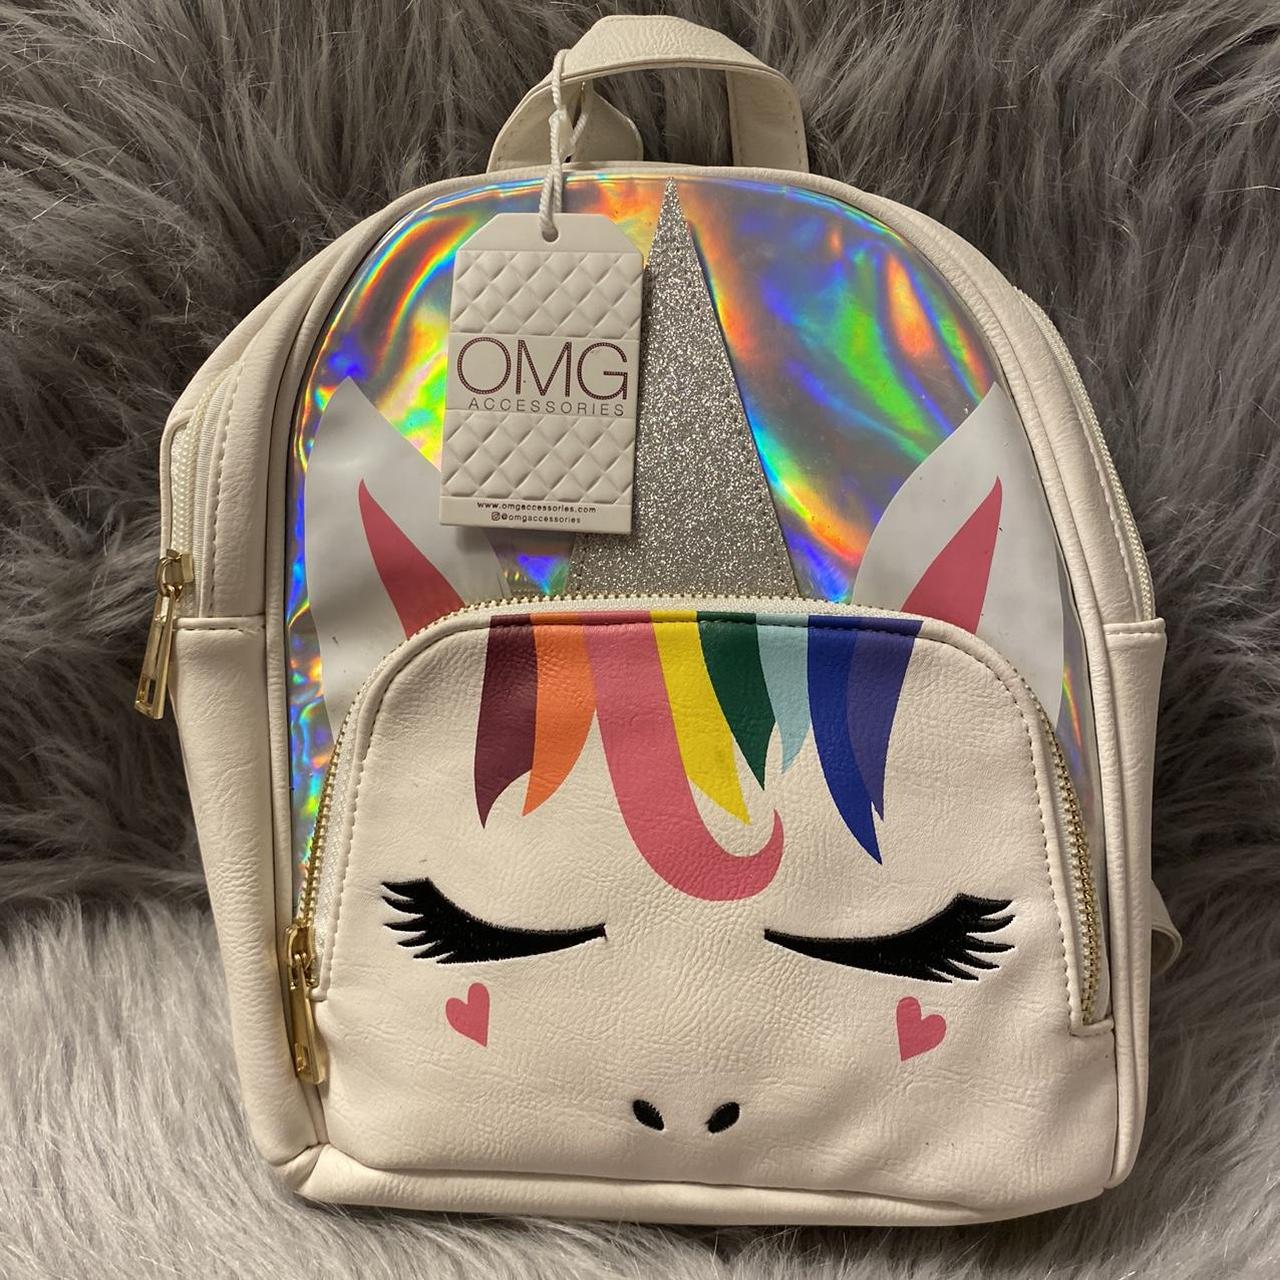 Buy Unicorn Printed Bts Backpack Online - Accessorize India